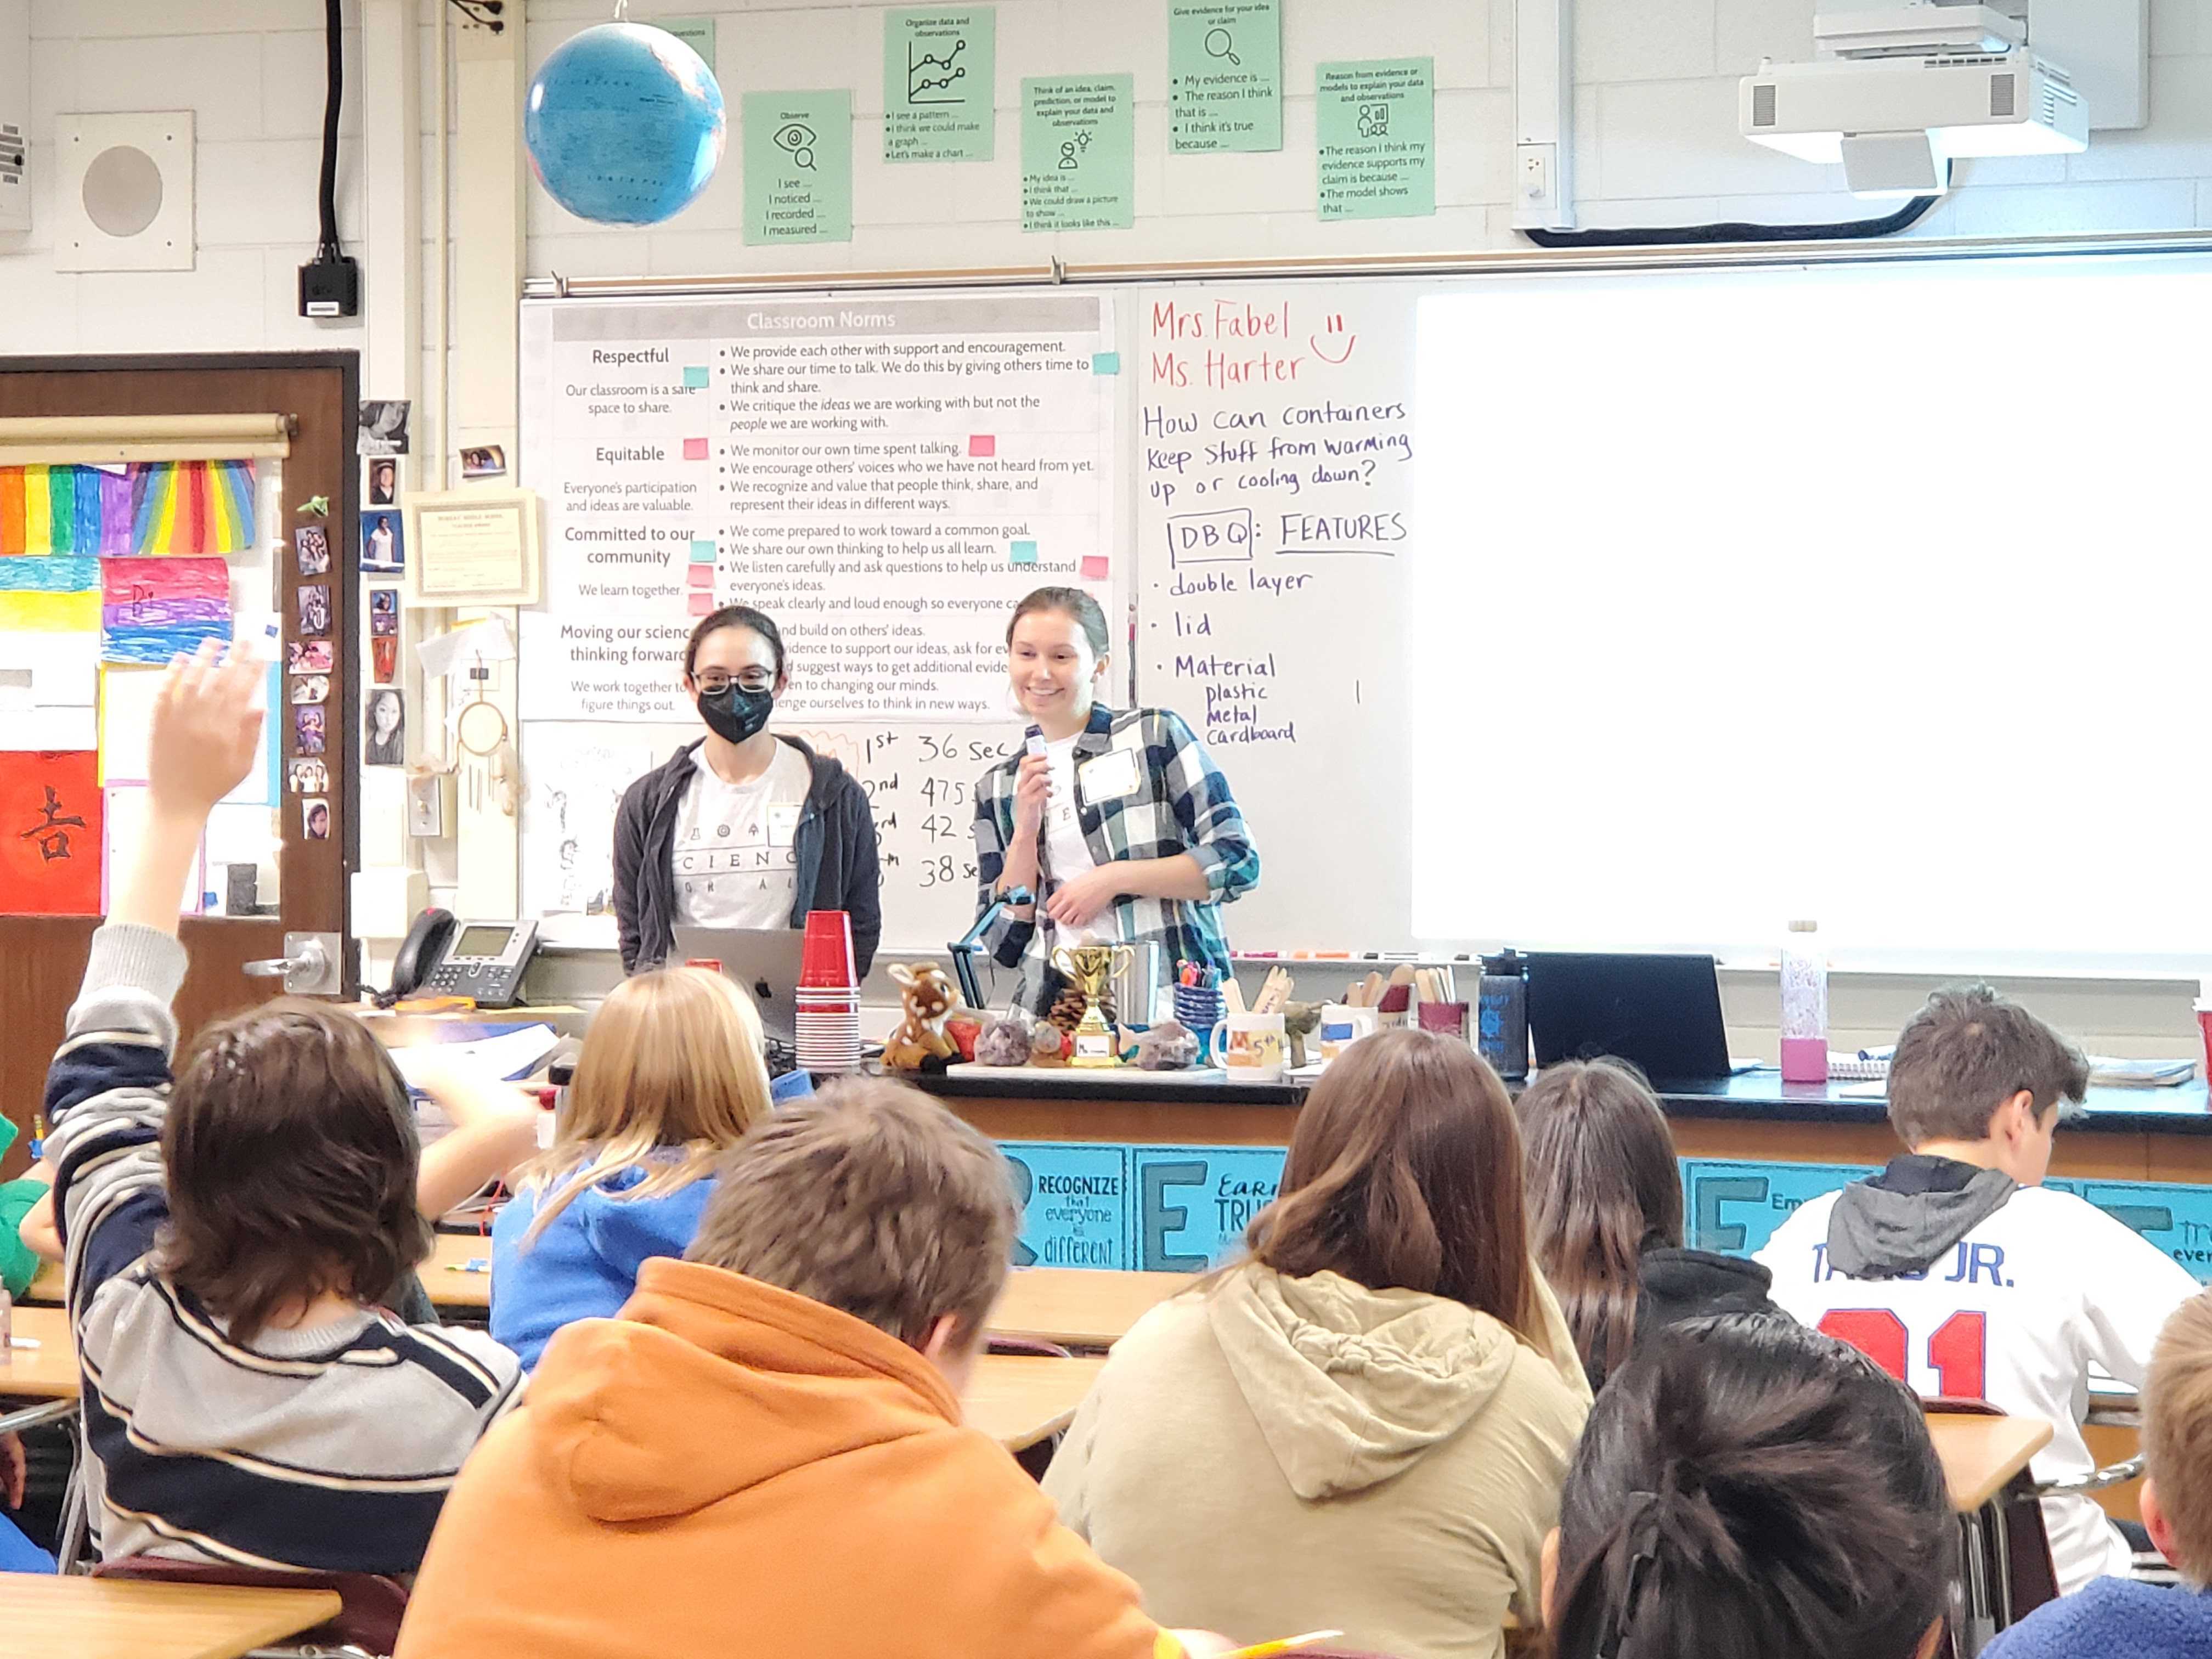 Emily and Kaylie answering a student's question during their presentation at the front of the classroom. 